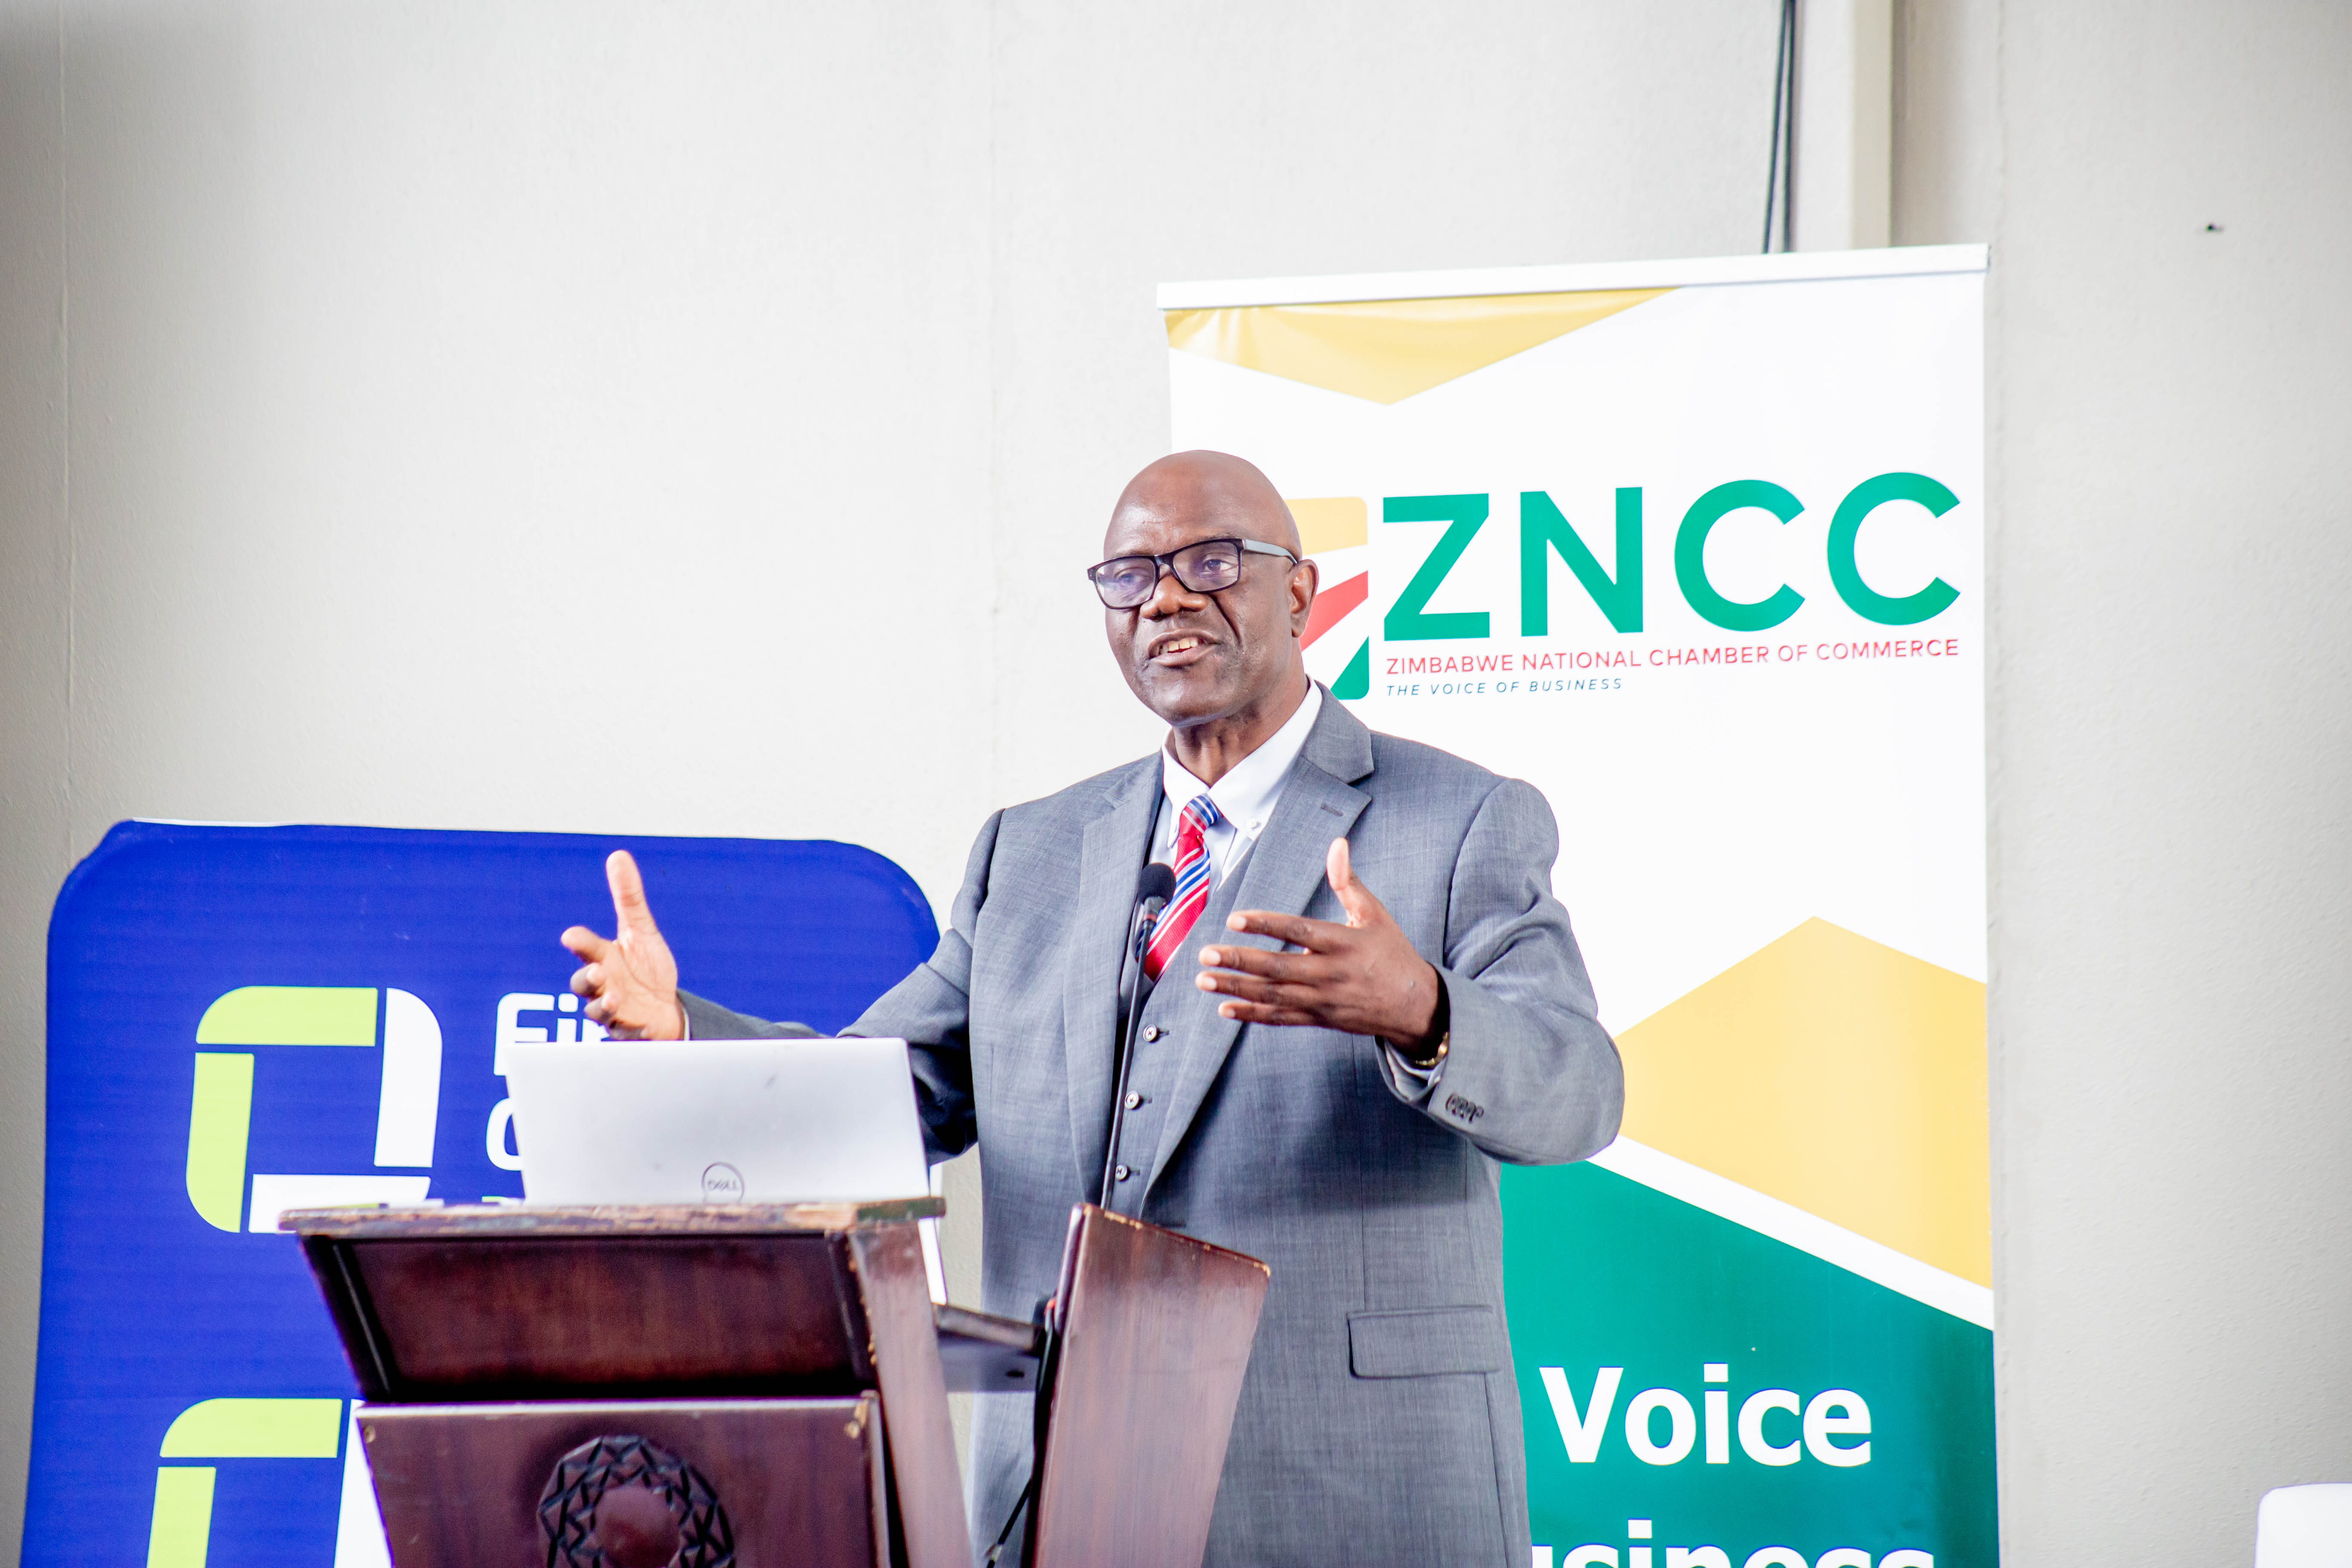 ZIMBABWE’S READINESS FOR ARTIFICIAL INTELLIGENCE: Prof. Arthur Mutambara – Director, Institute for the Future of Knowledge